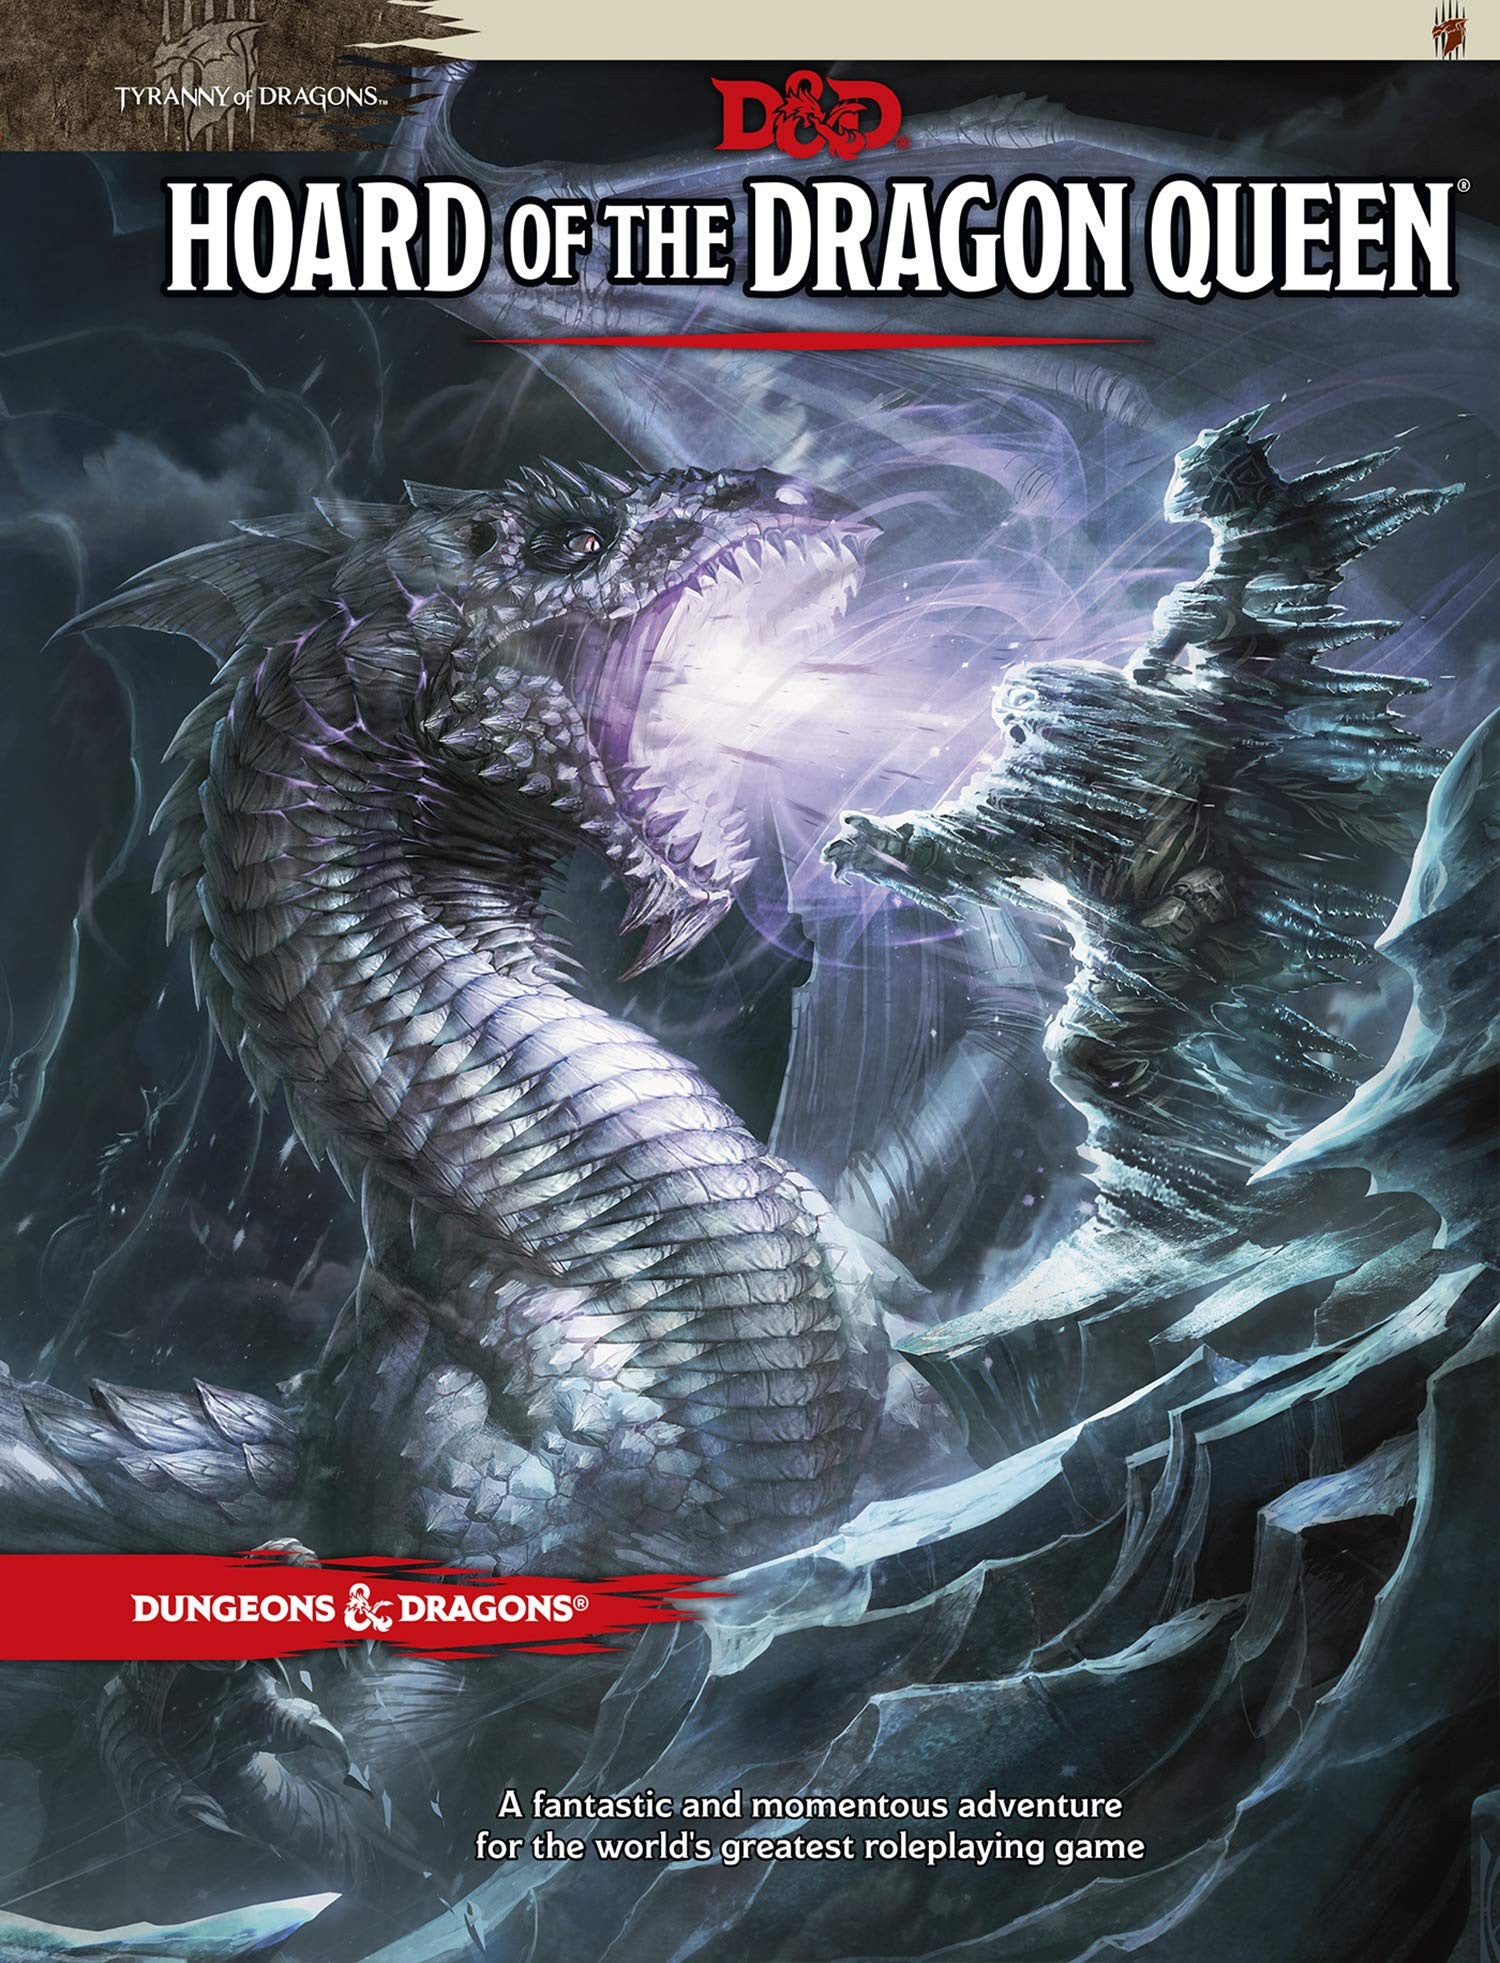 D&D Dungeons & Dragons Tyranny of Dragons Hoard of the Dragon Queen Hardcover